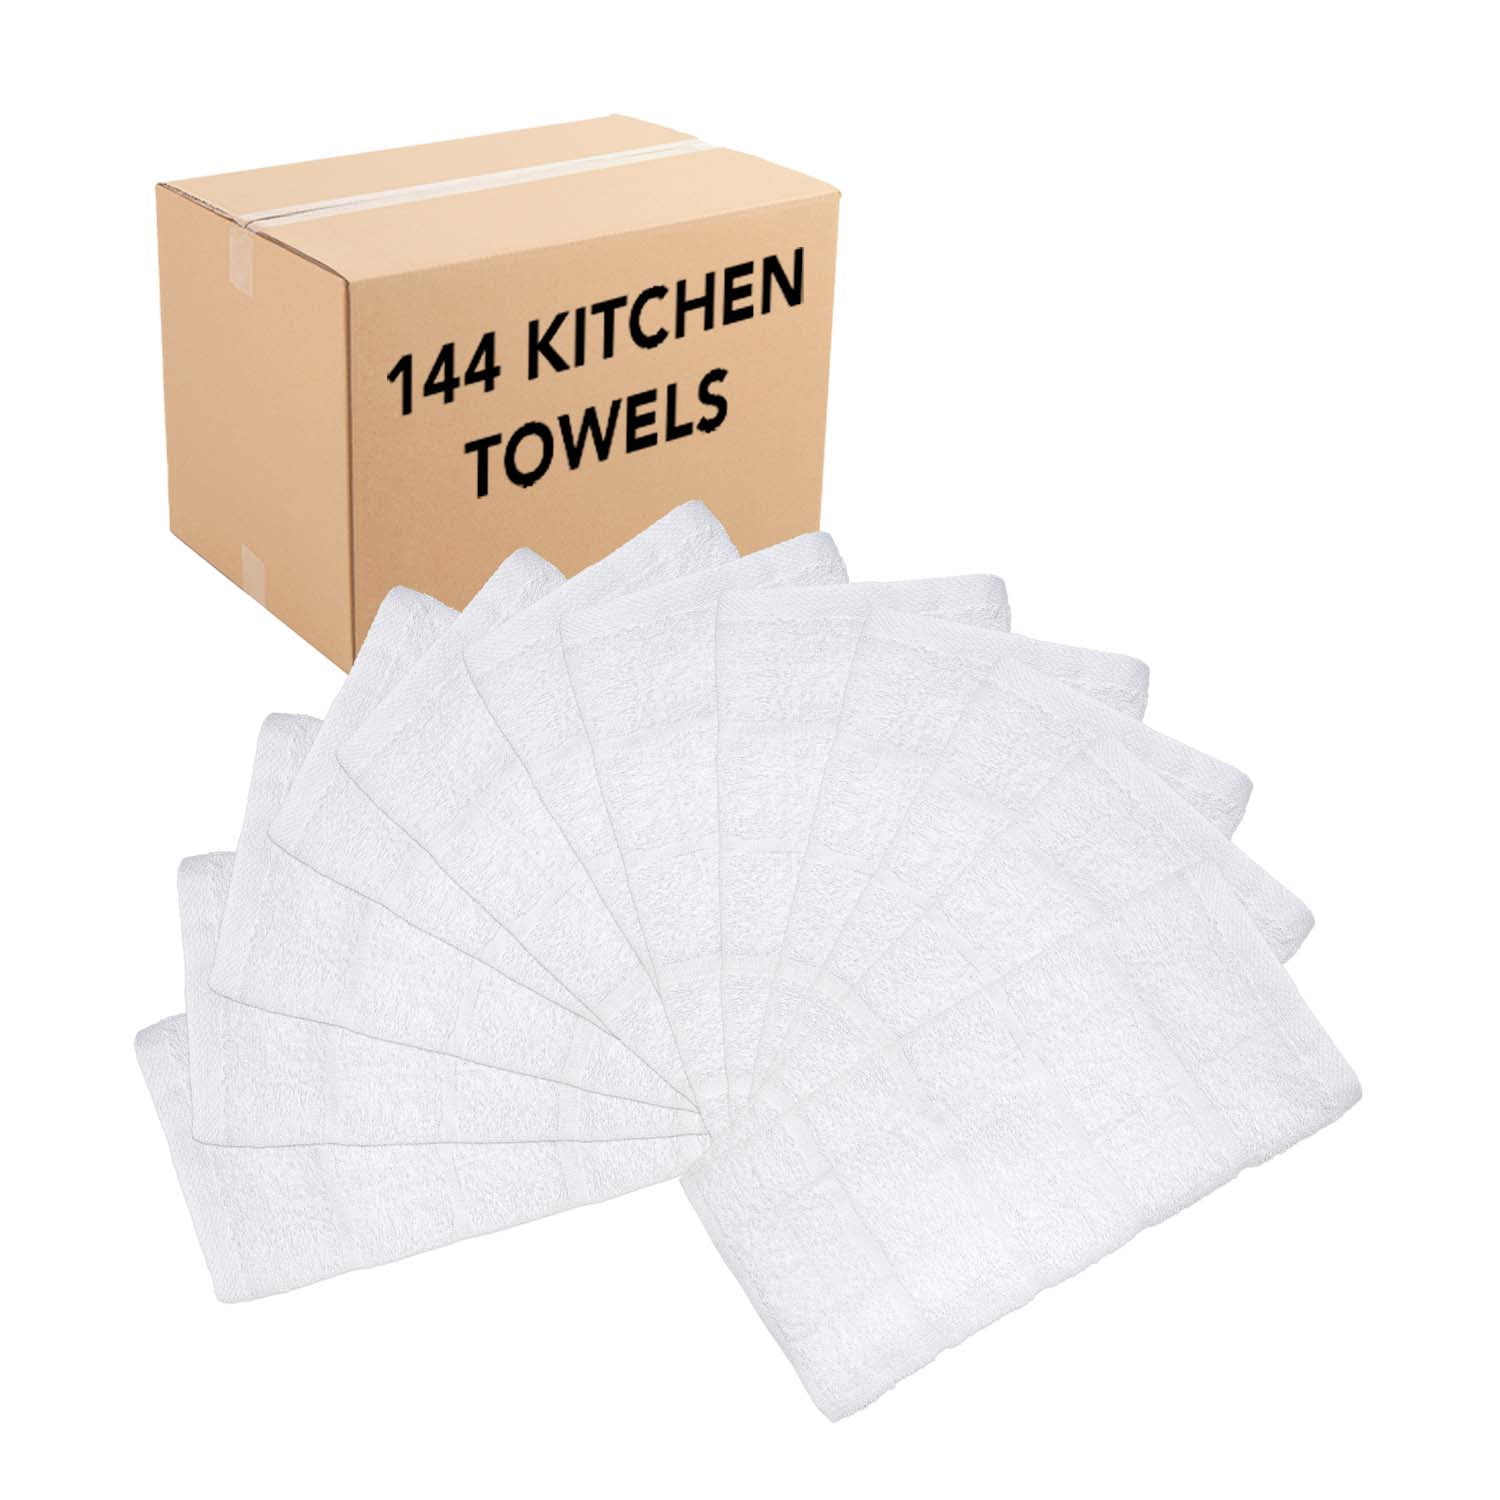 Arkwright W43 Cleaning Rags - Bulk Premium T-Shirt Material Wash Cloths,  Lightweight Quick Dry Absorbent Dish Towel for Home, Bars, Restaurant, Car,  5